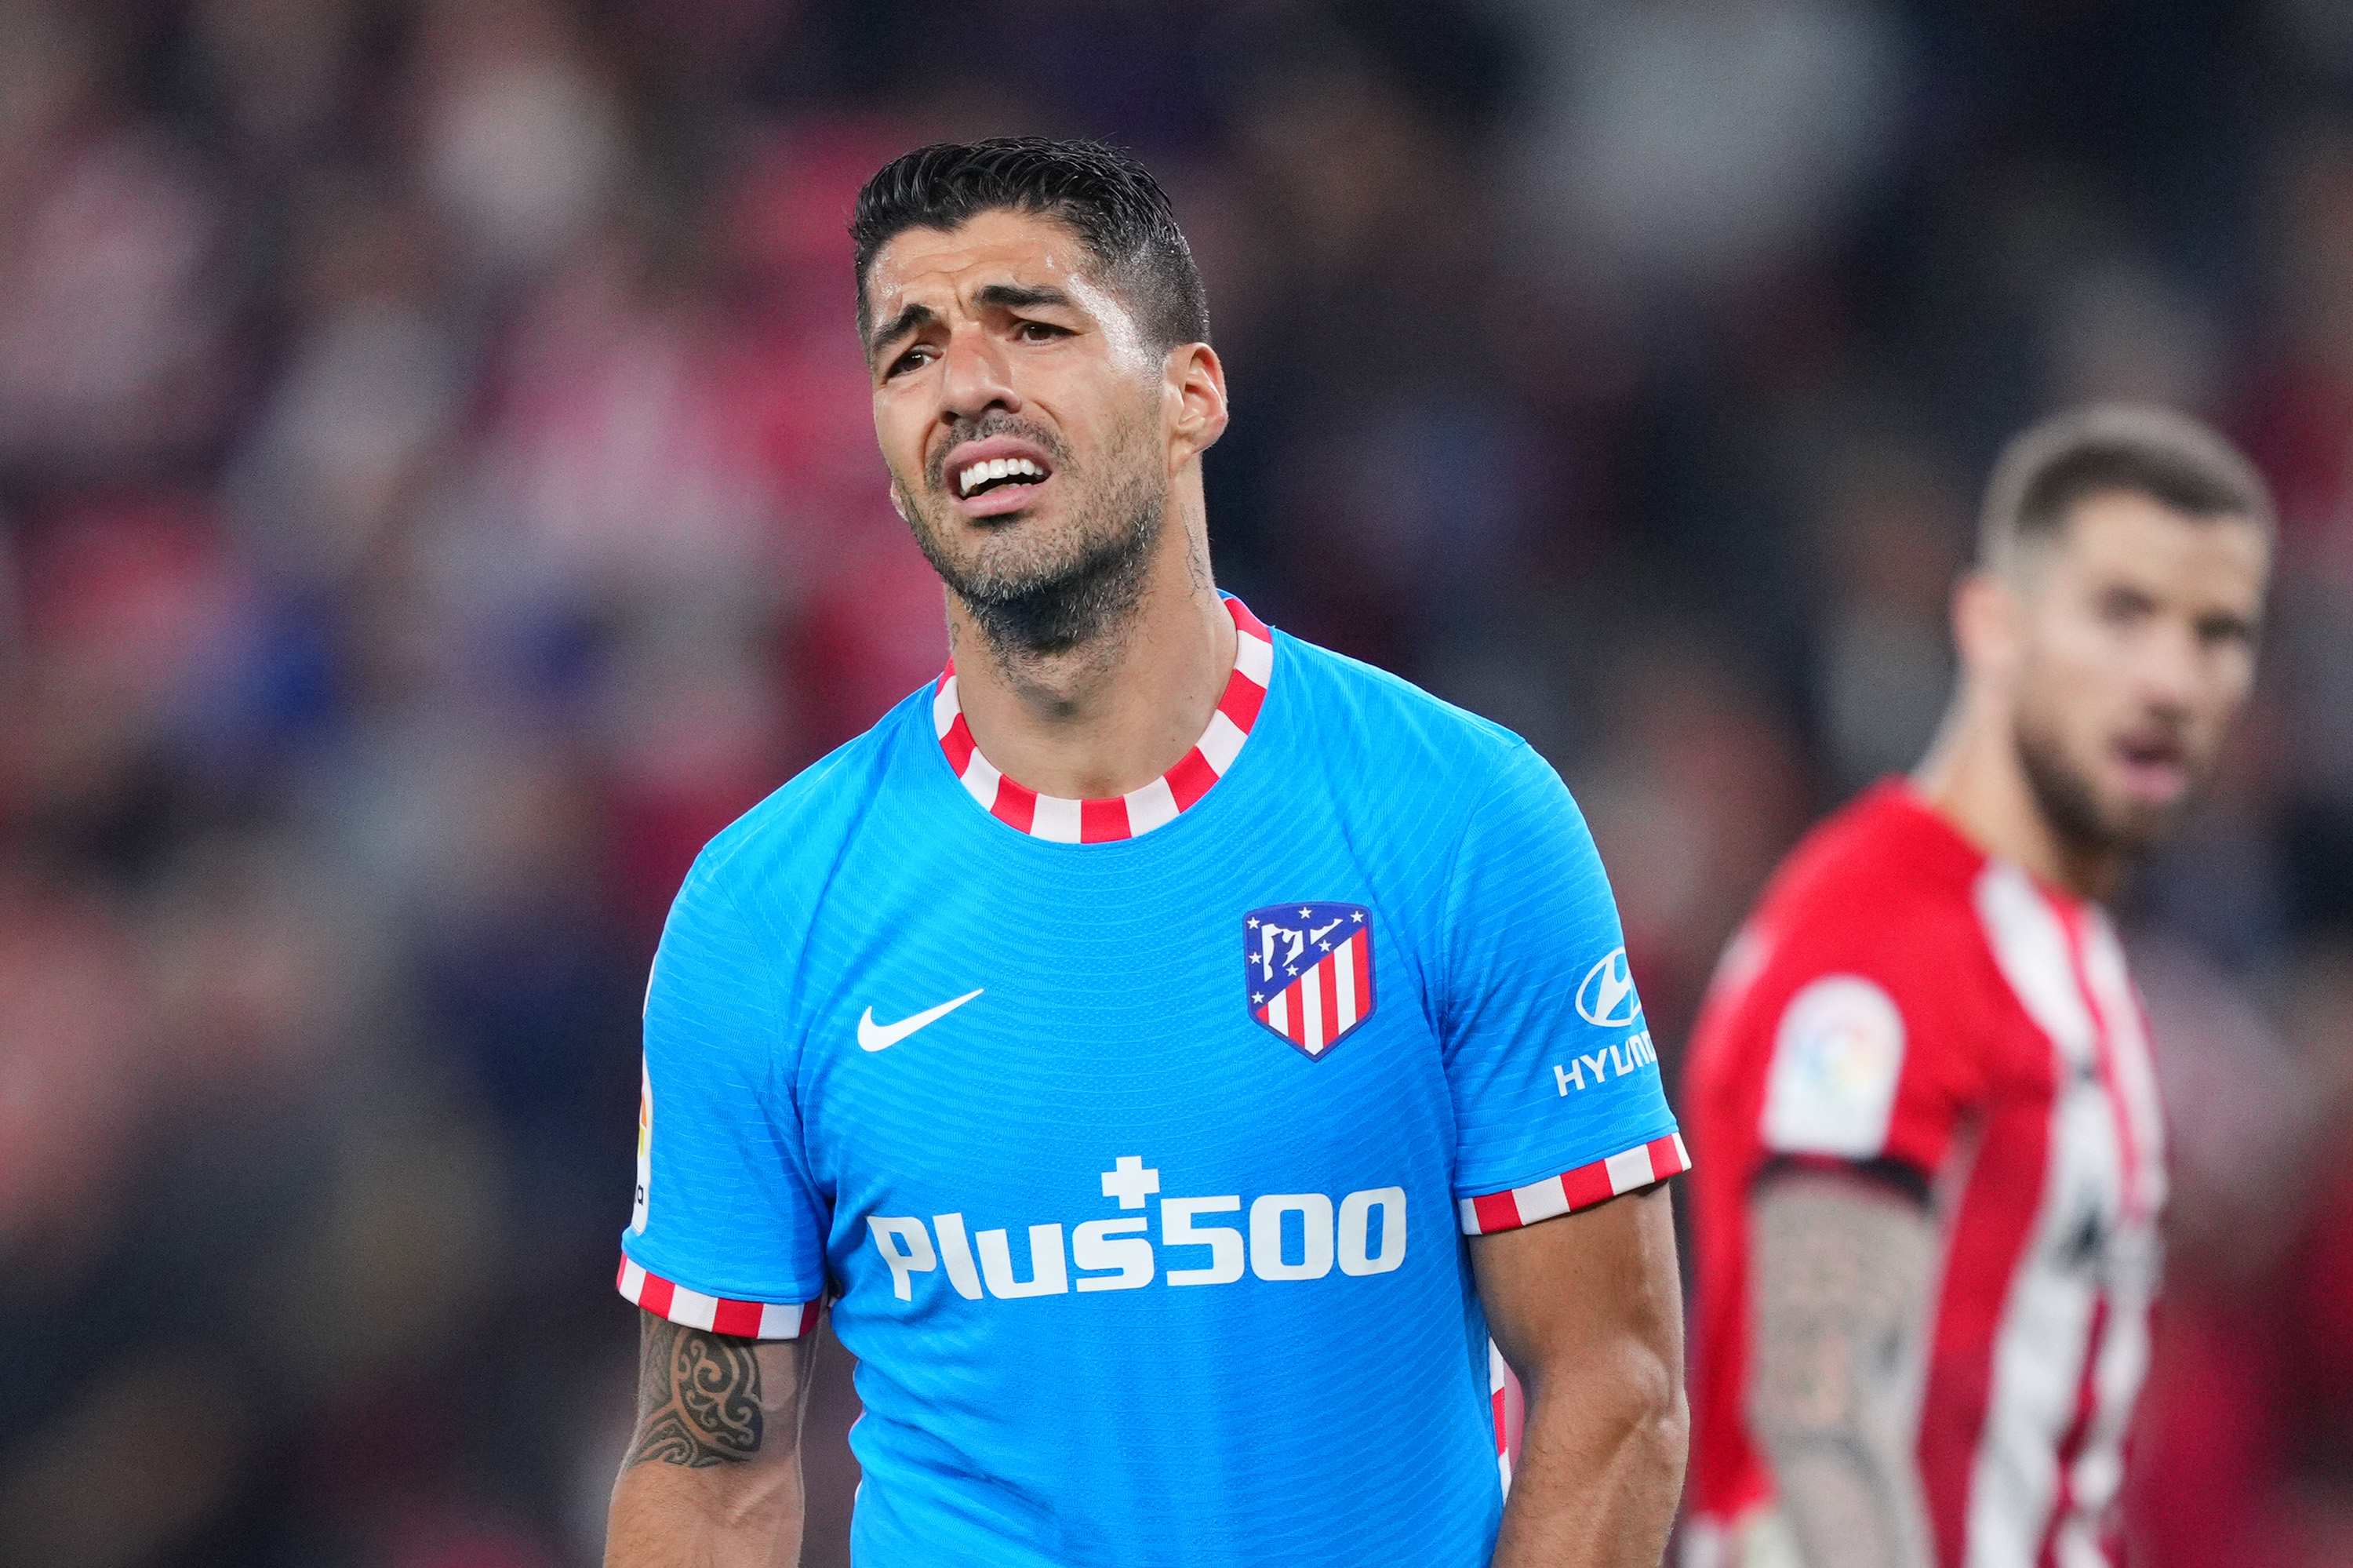 Luis Suarez believes Atletico Madrid no longer have the players for ‘Cholismo’